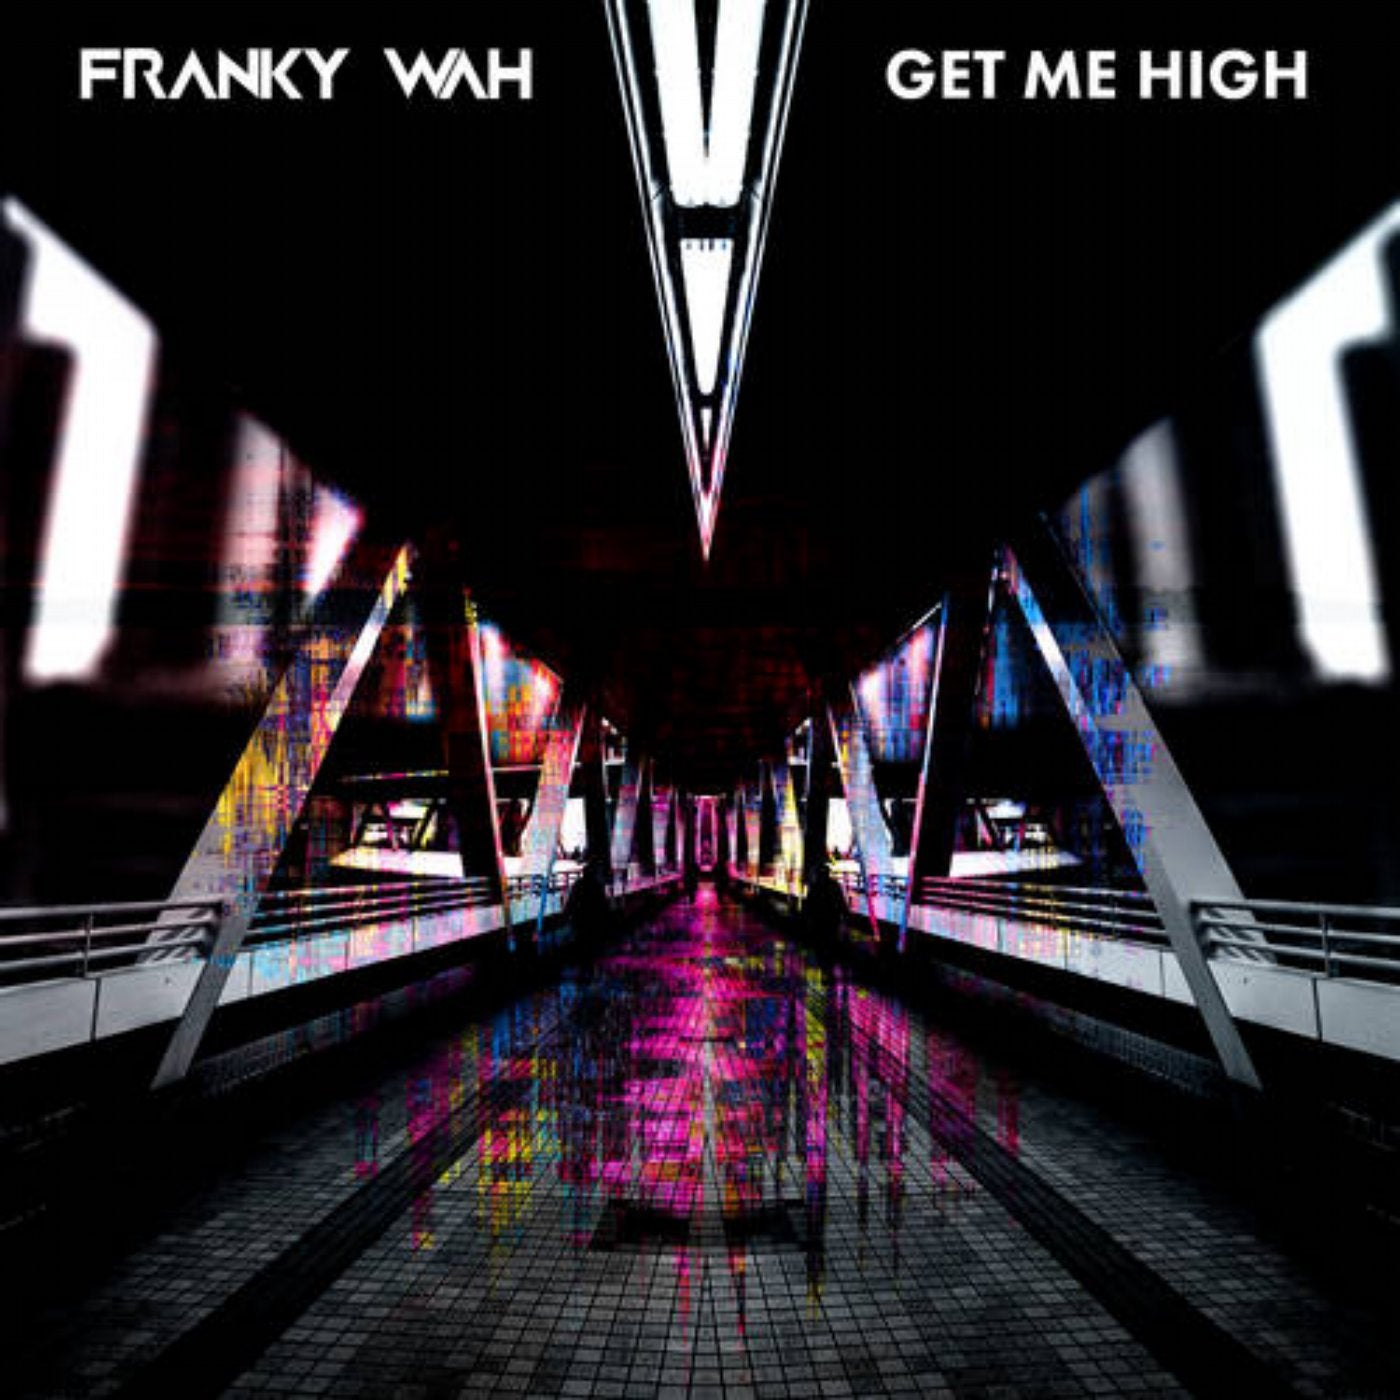 Come Together Original Mix By Franky Wah On Beatport